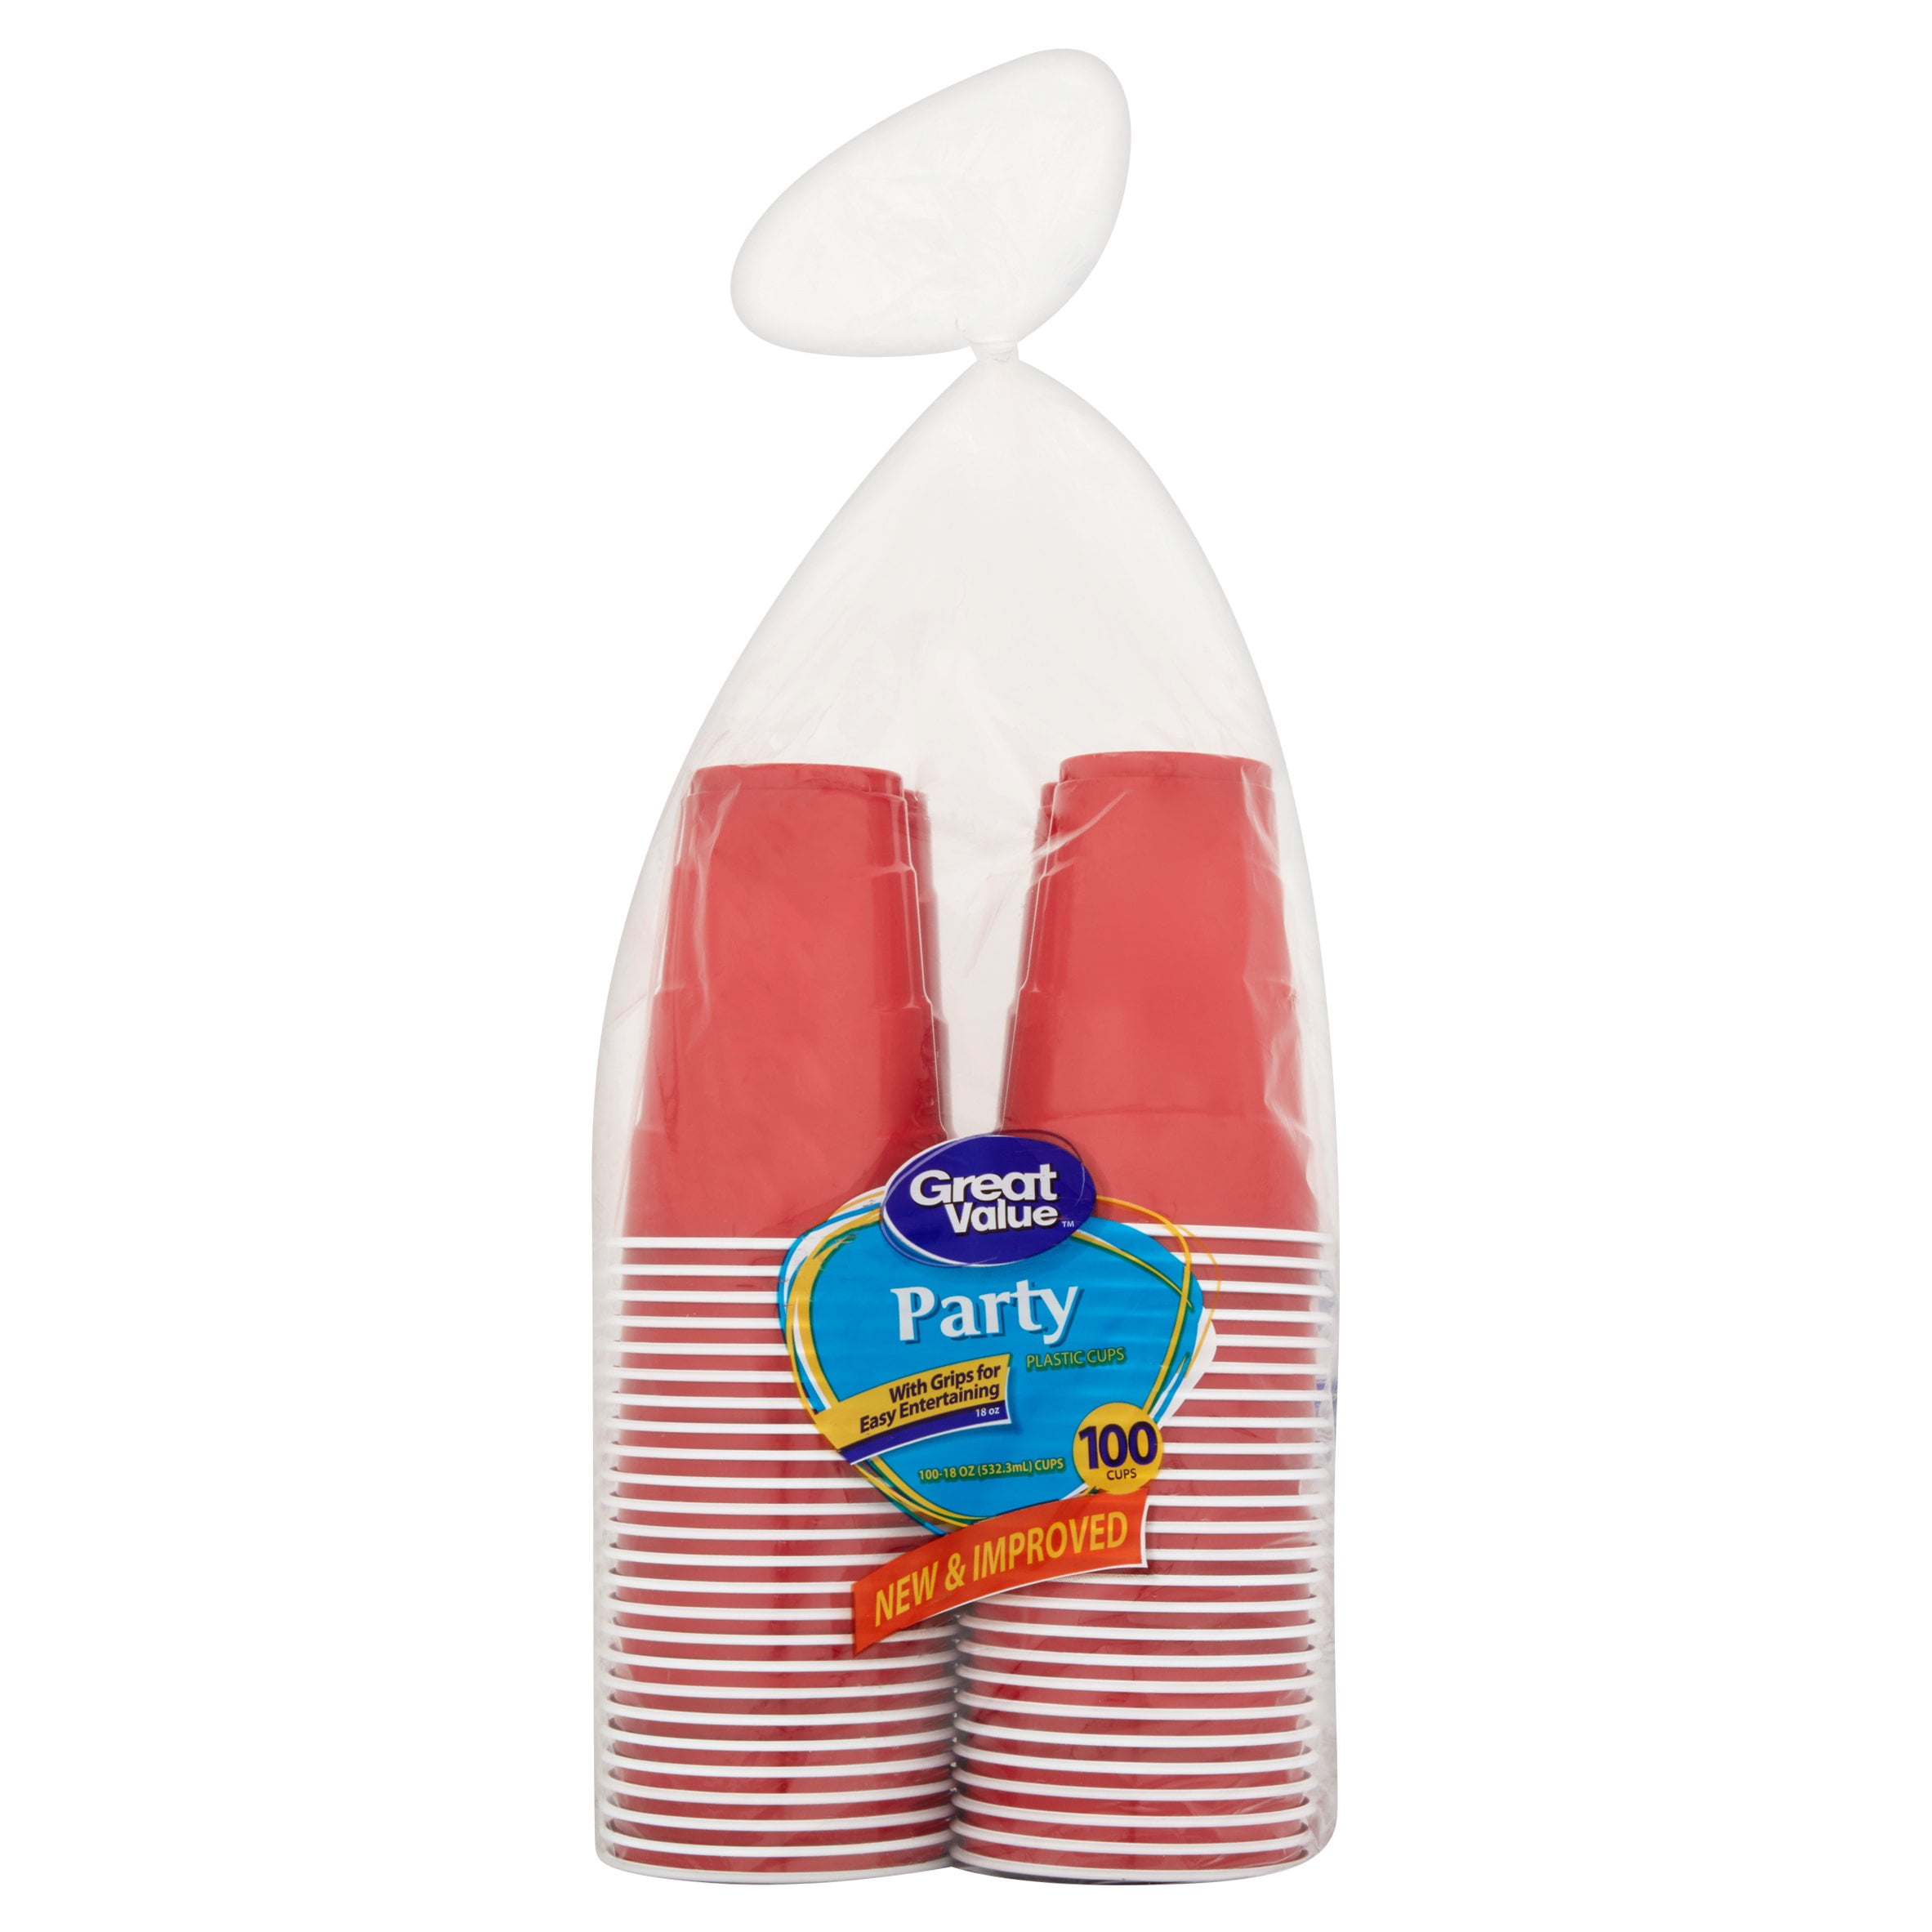 EZ Plastic Cups 16oz 12ct Red-wholesale -  - Online  wholesale store of general merchandise and grocery items